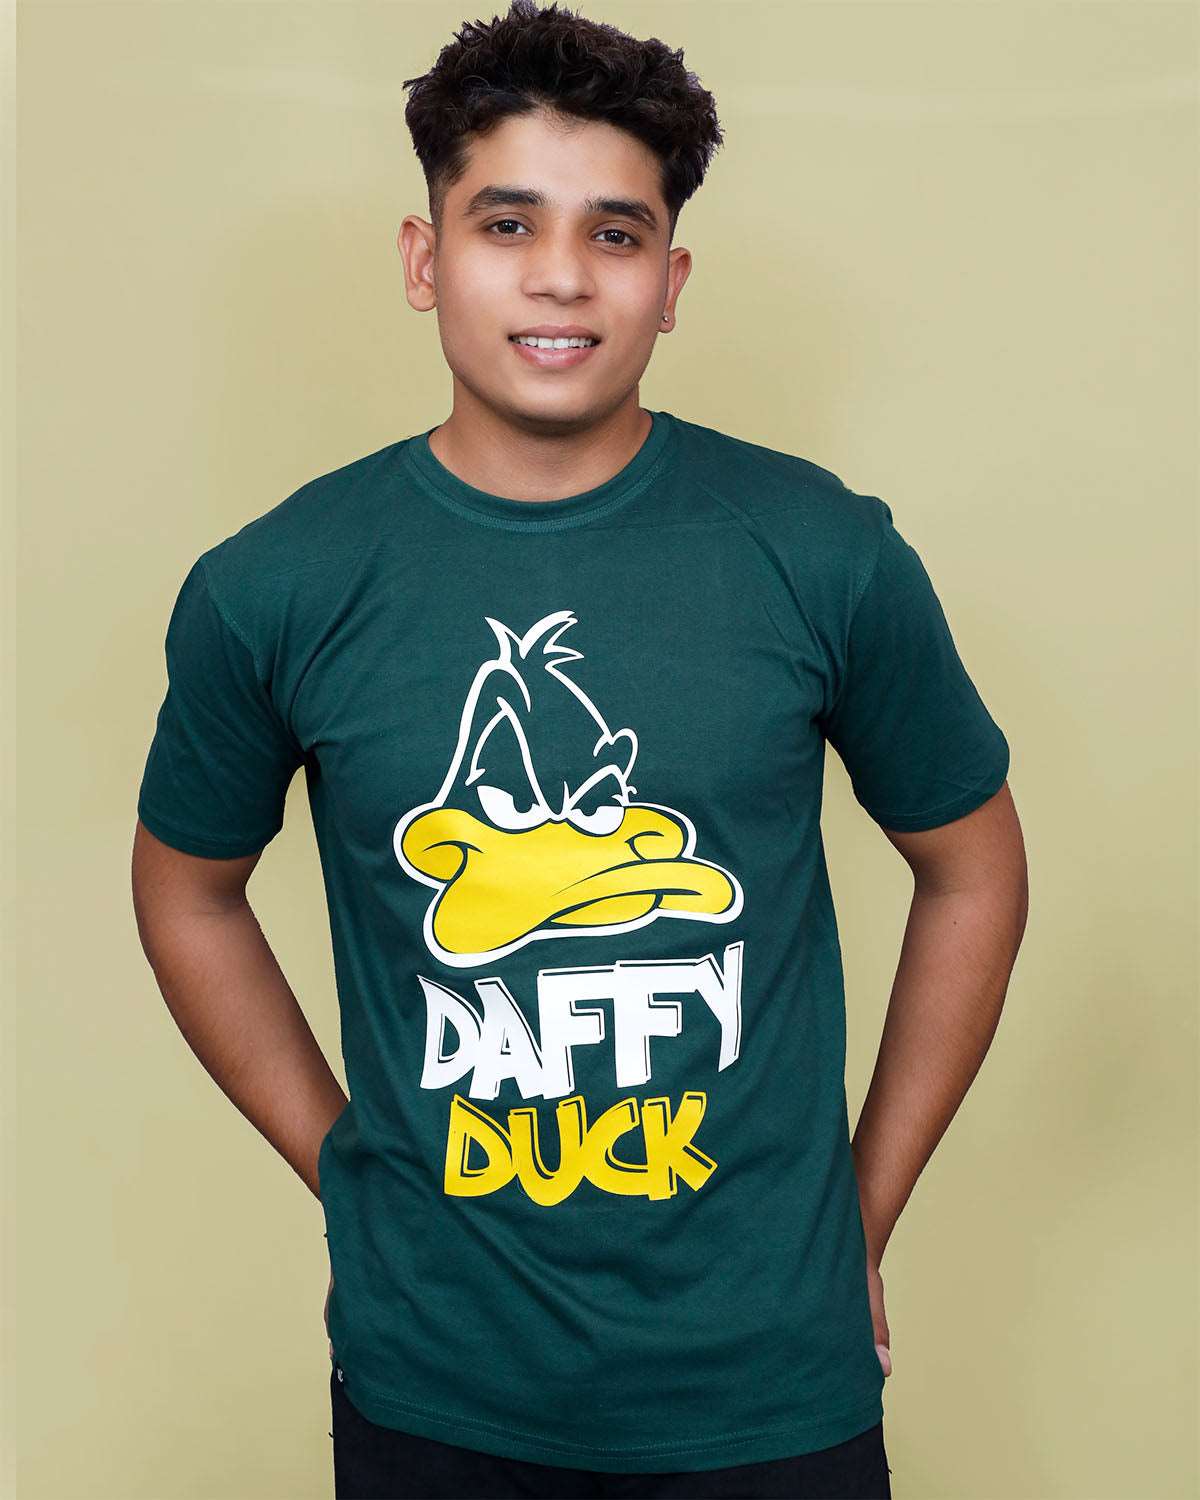 men standing and wearing a black daffy duck green mens tshirt